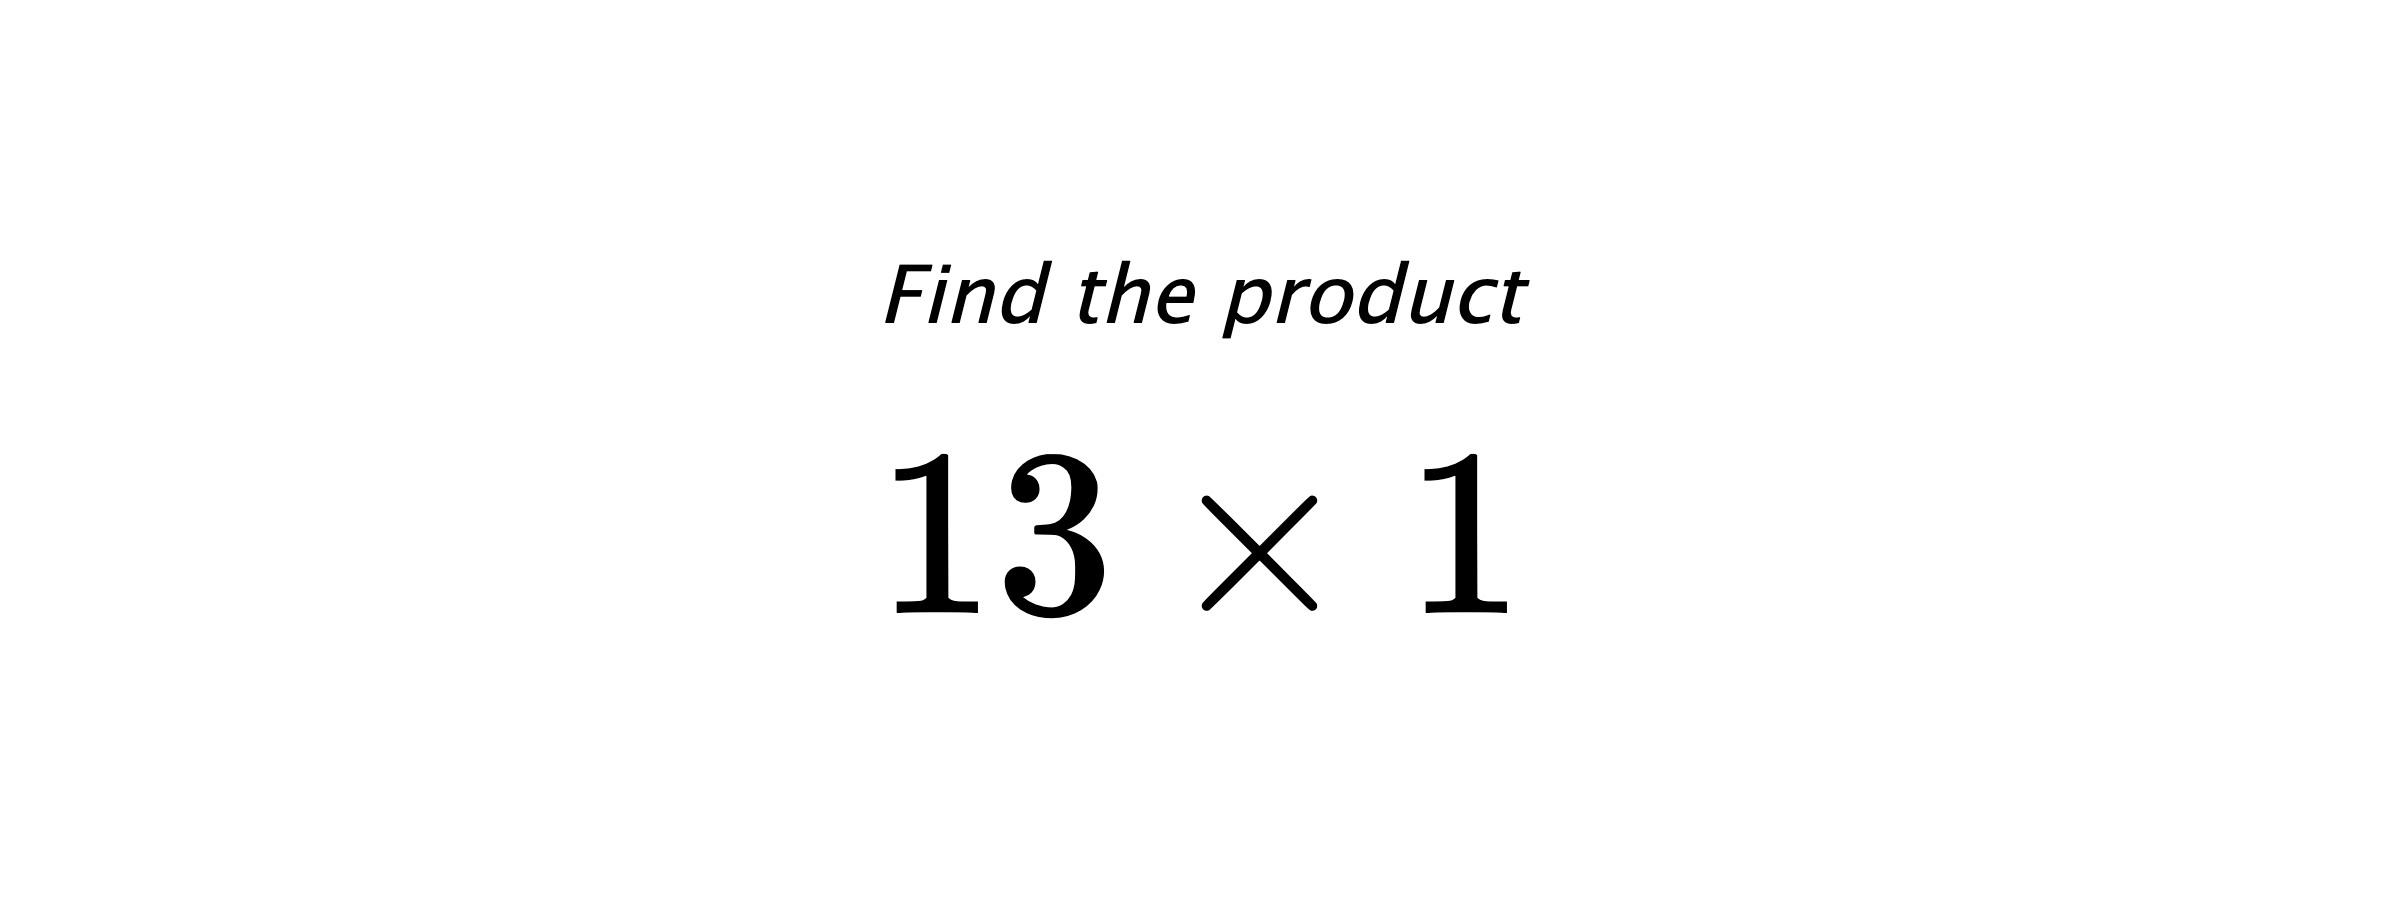 Find the product $ 13 \times 1 $